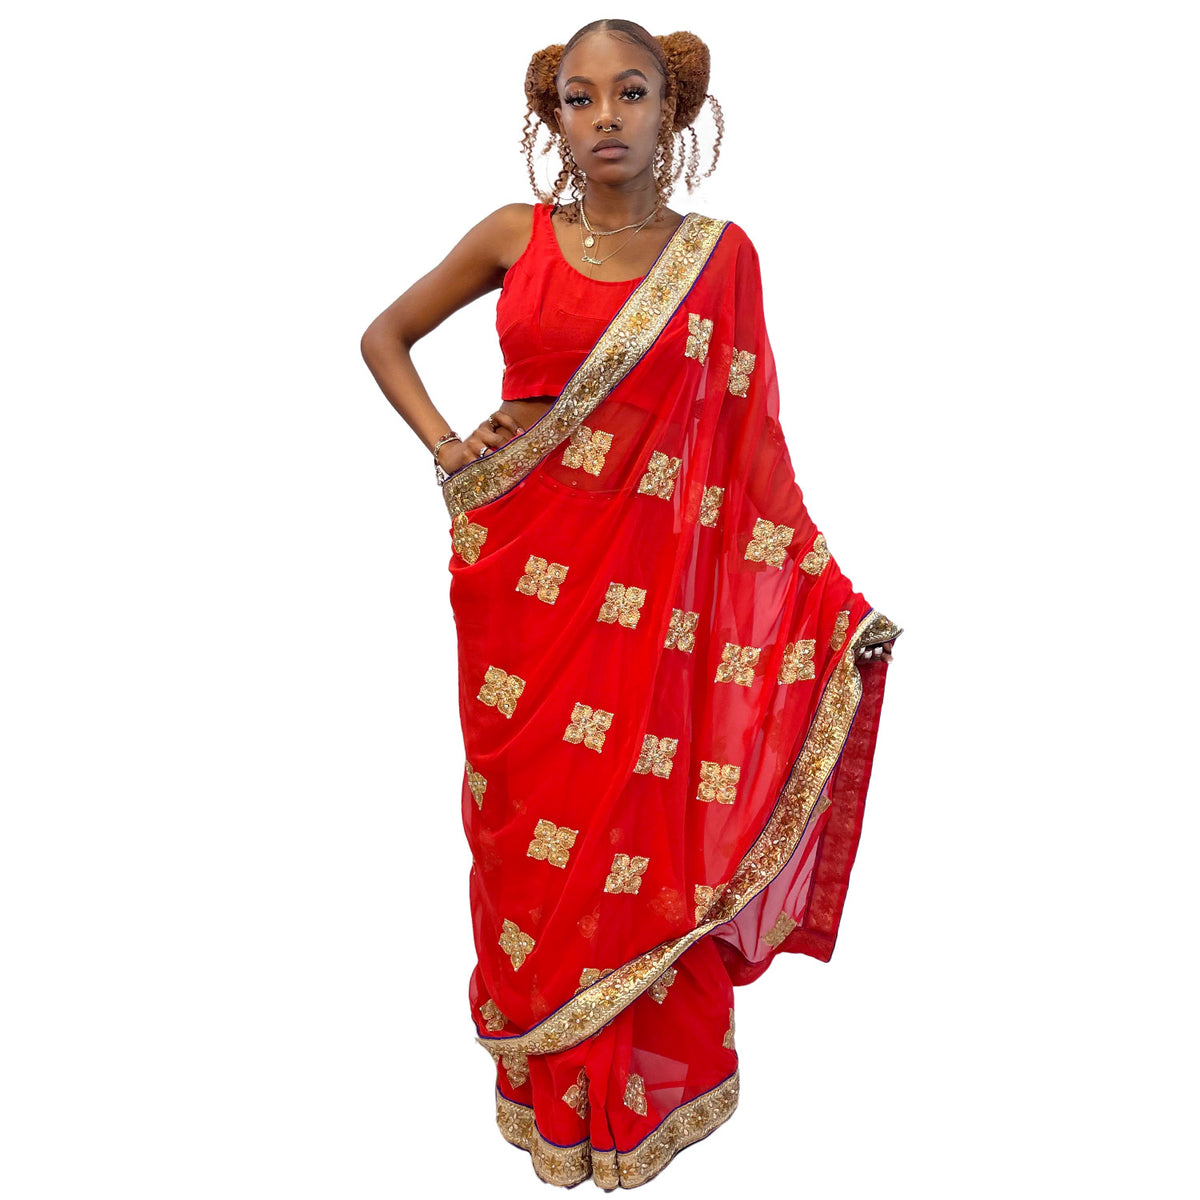 Bollywood Bride Adult Costume